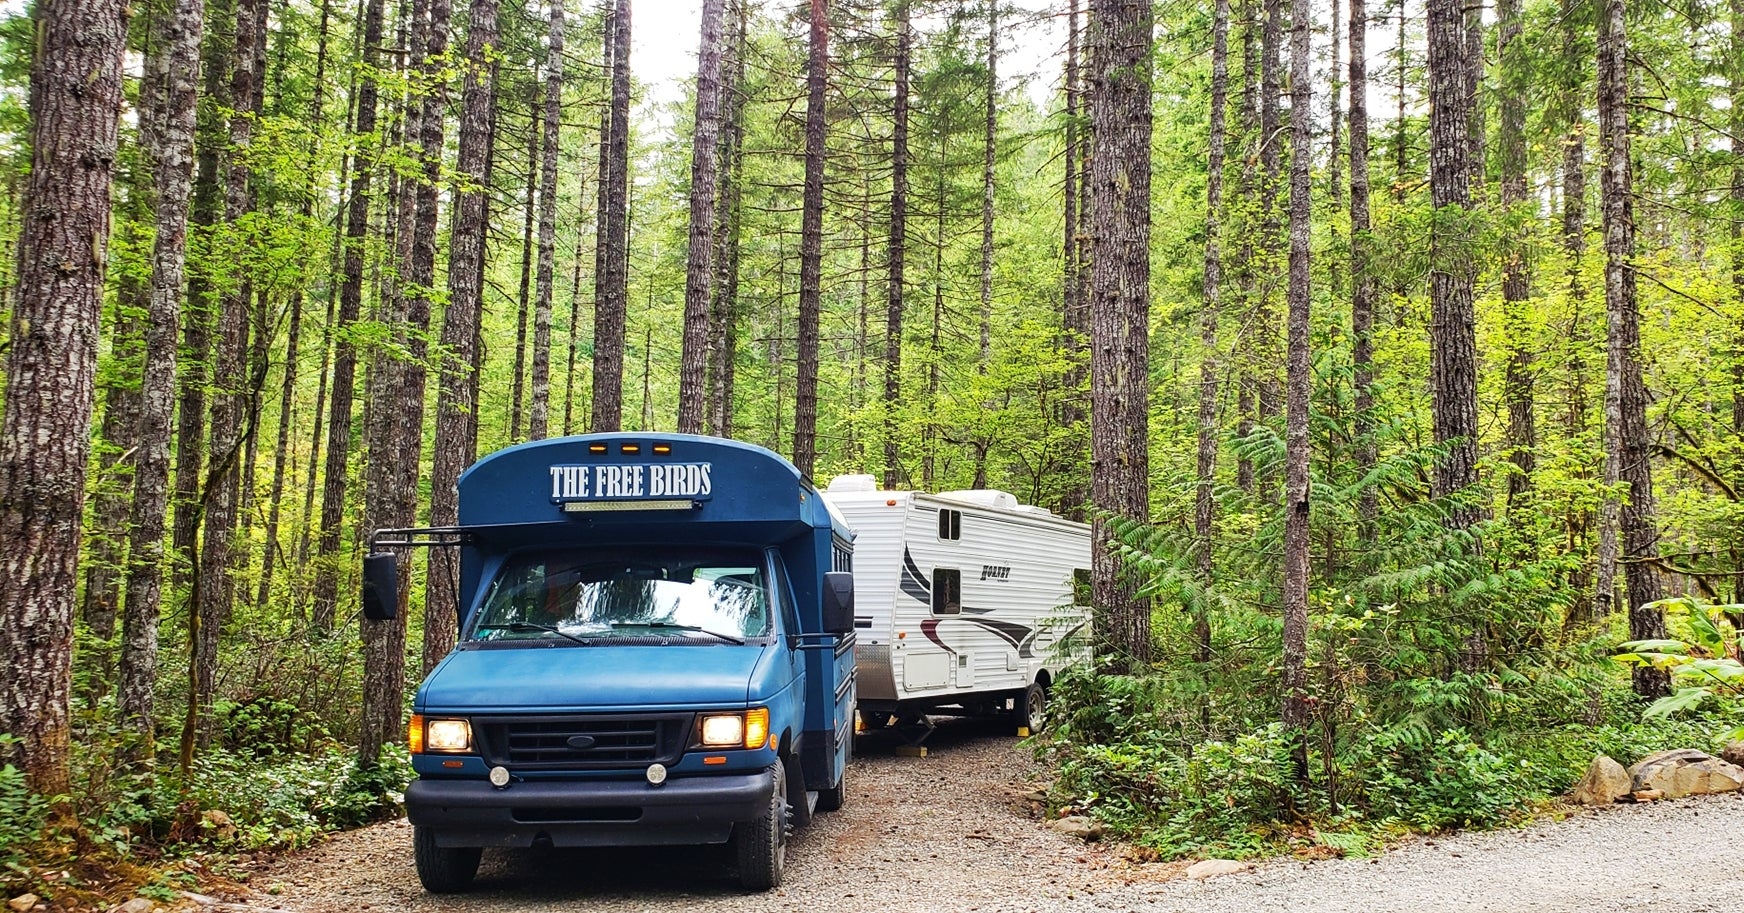 Camper submitted image from Big Creek Campground - 5